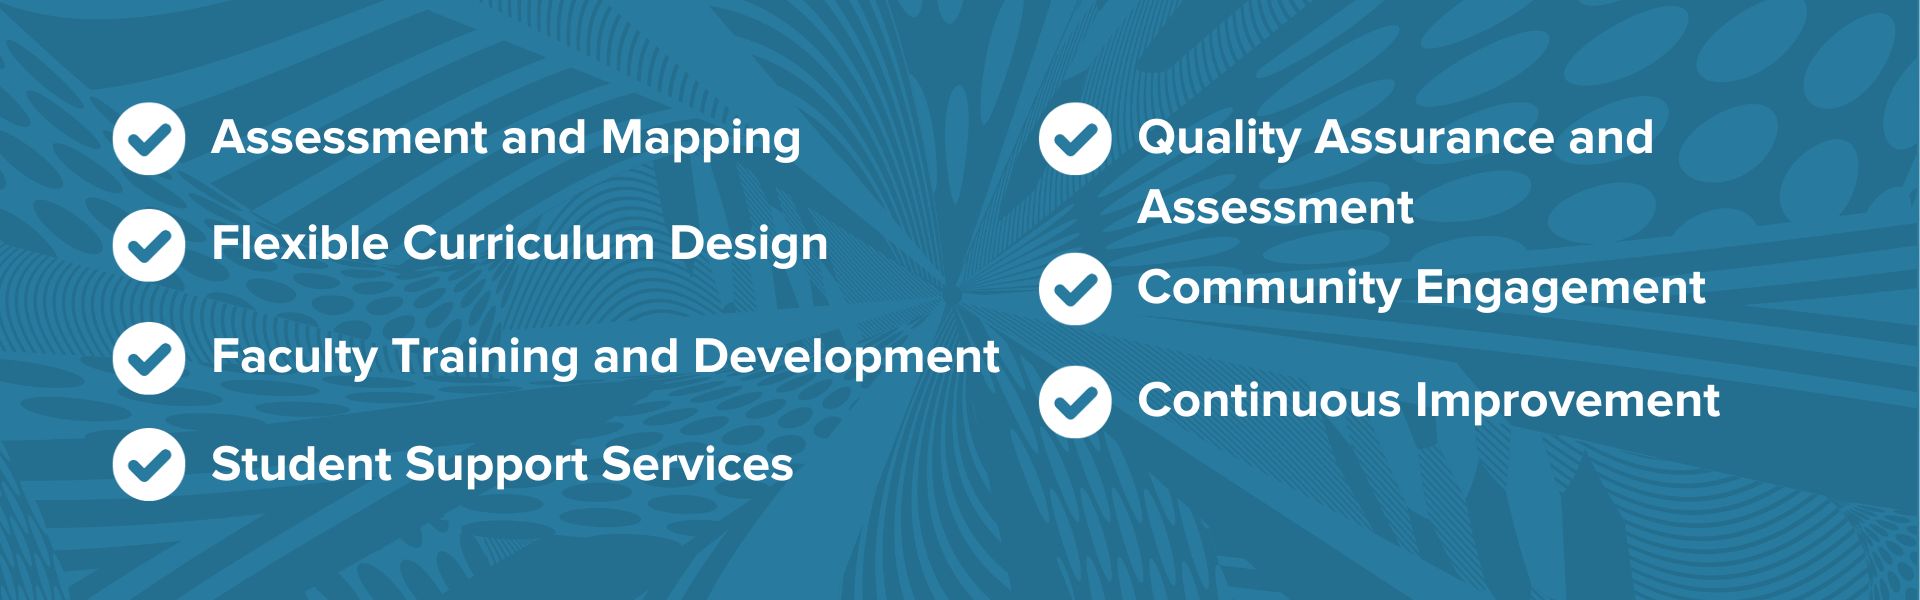 checklist steps of how to start on the path to CBE: 1) assessment and mapping, 2) flexible curriculum design, 3) faculty training and development, 4) student support services, 5) quality assurance and assessment, 6) community engagement, 7) continuous improvement